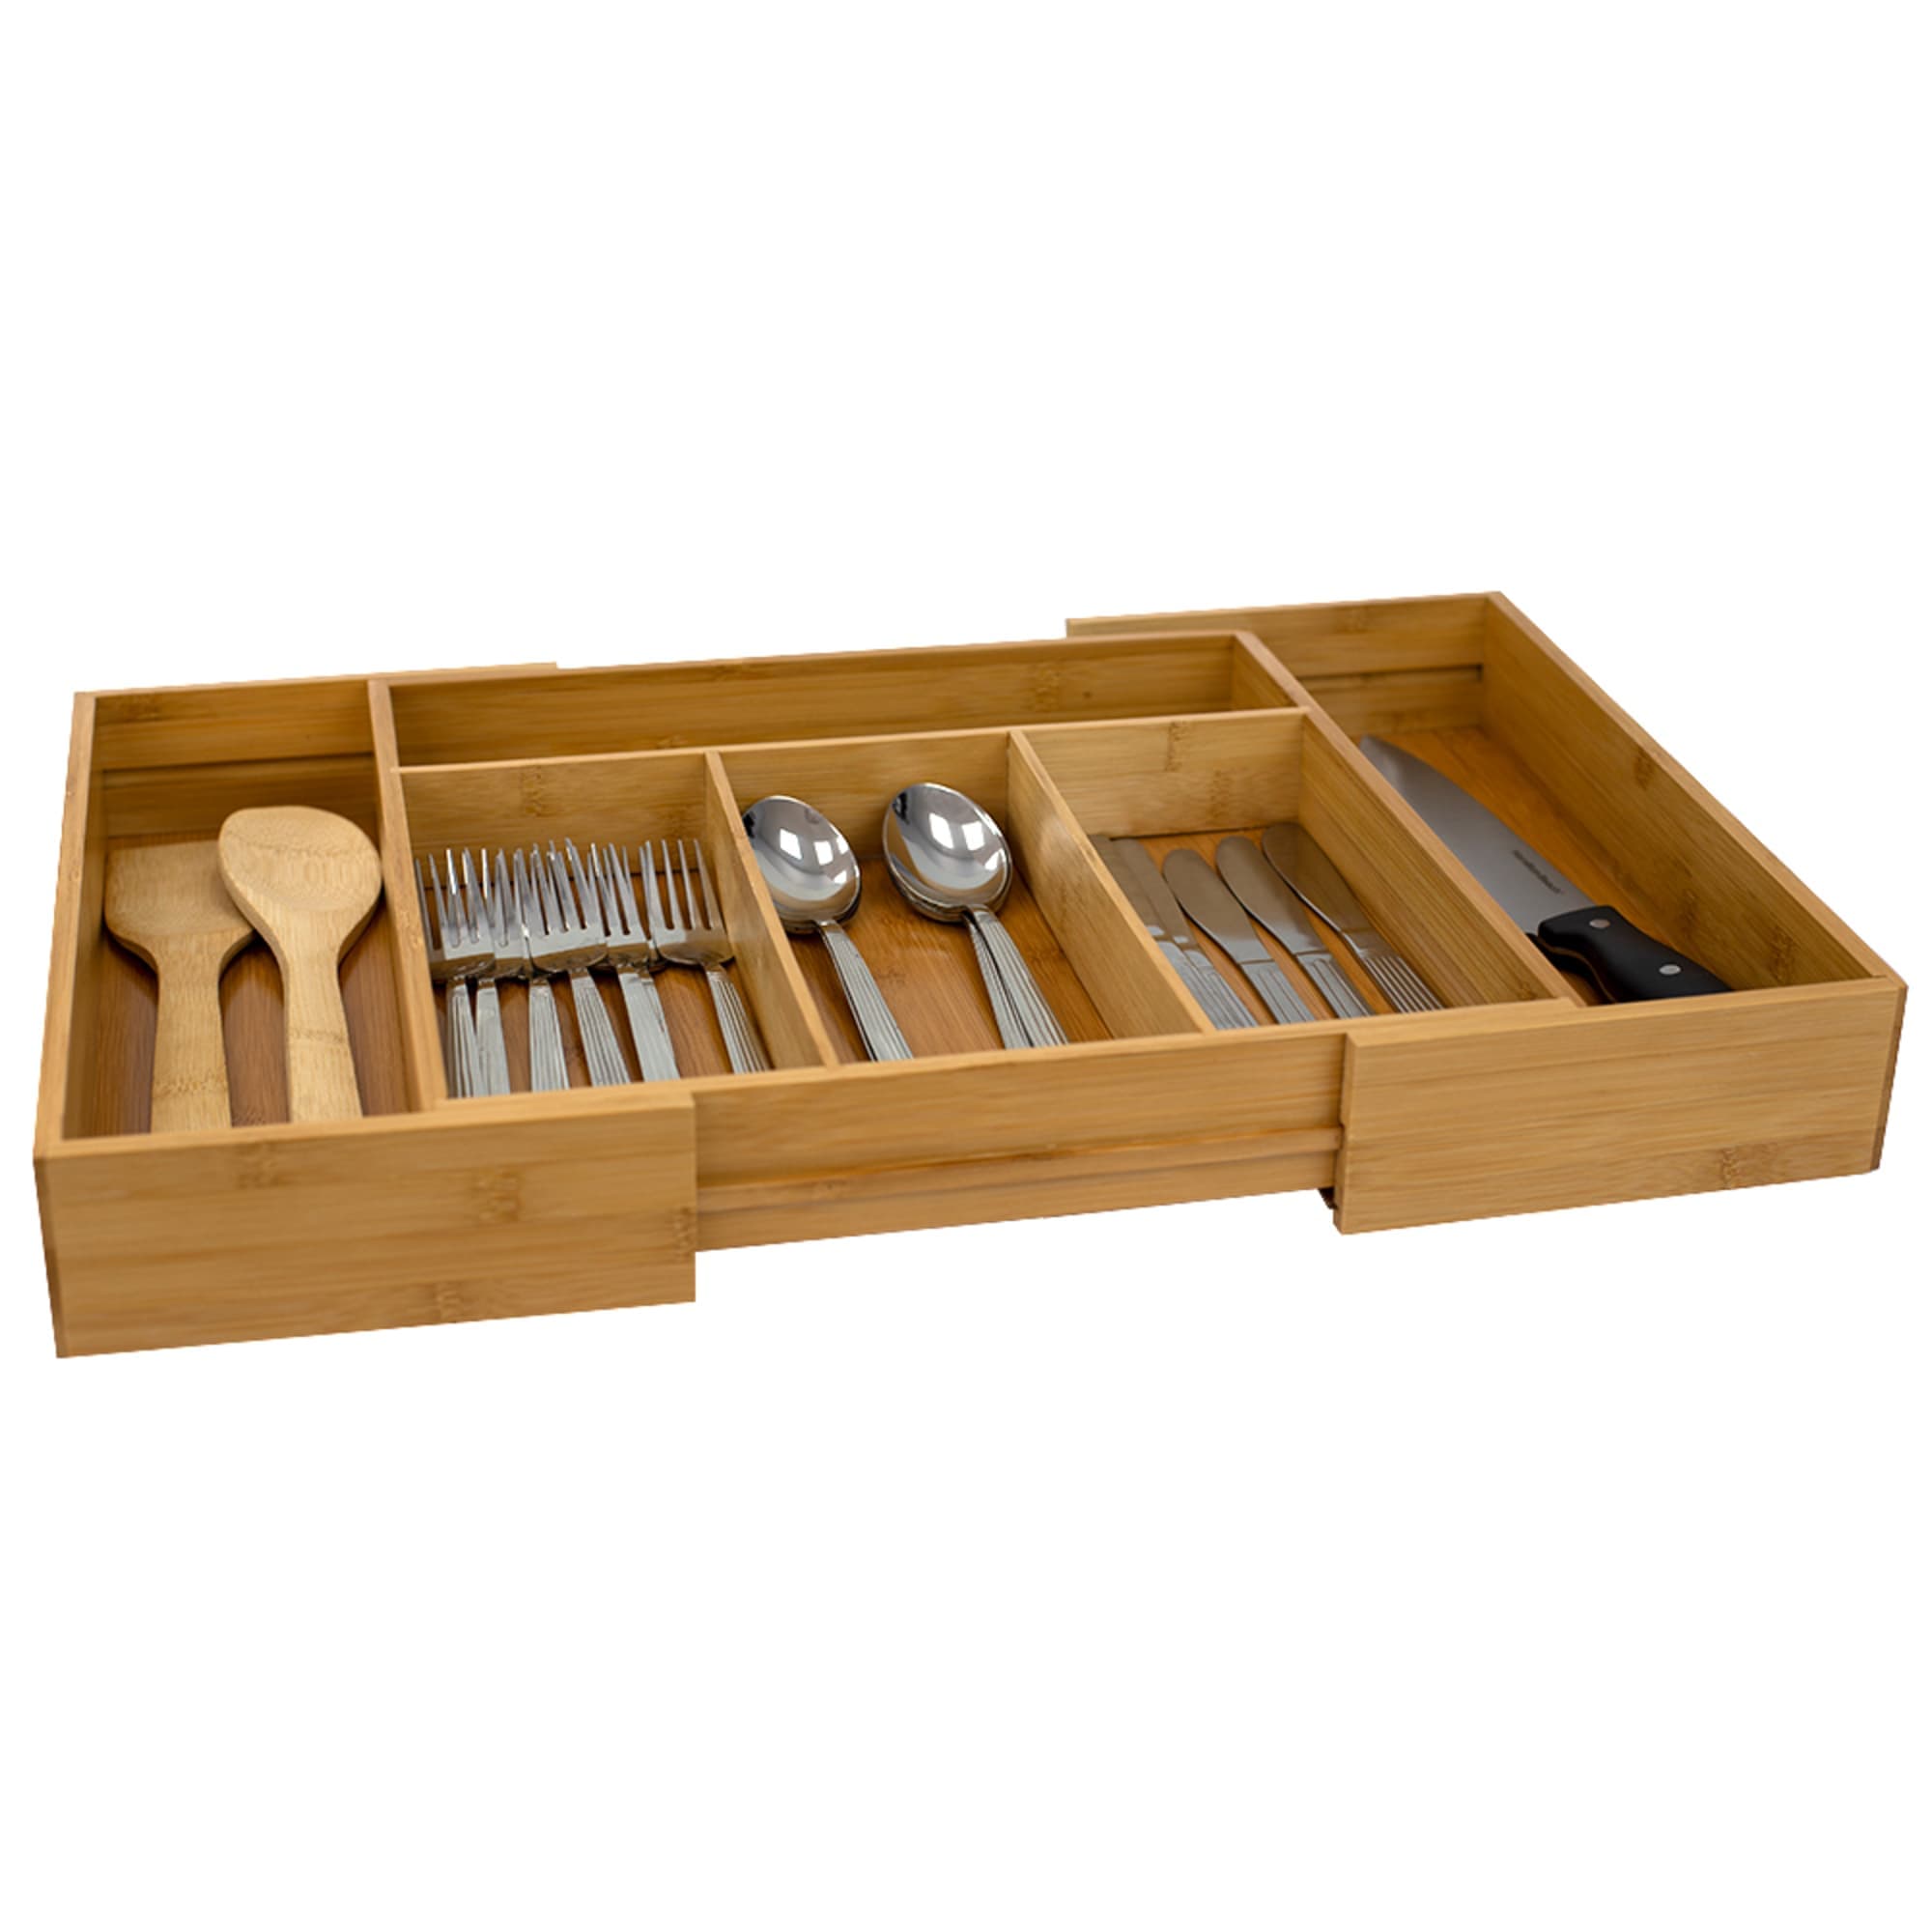 Home Basics Expandable Bamboo Cutlery Tray, Natural $12.00 EACH, CASE PACK OF 6